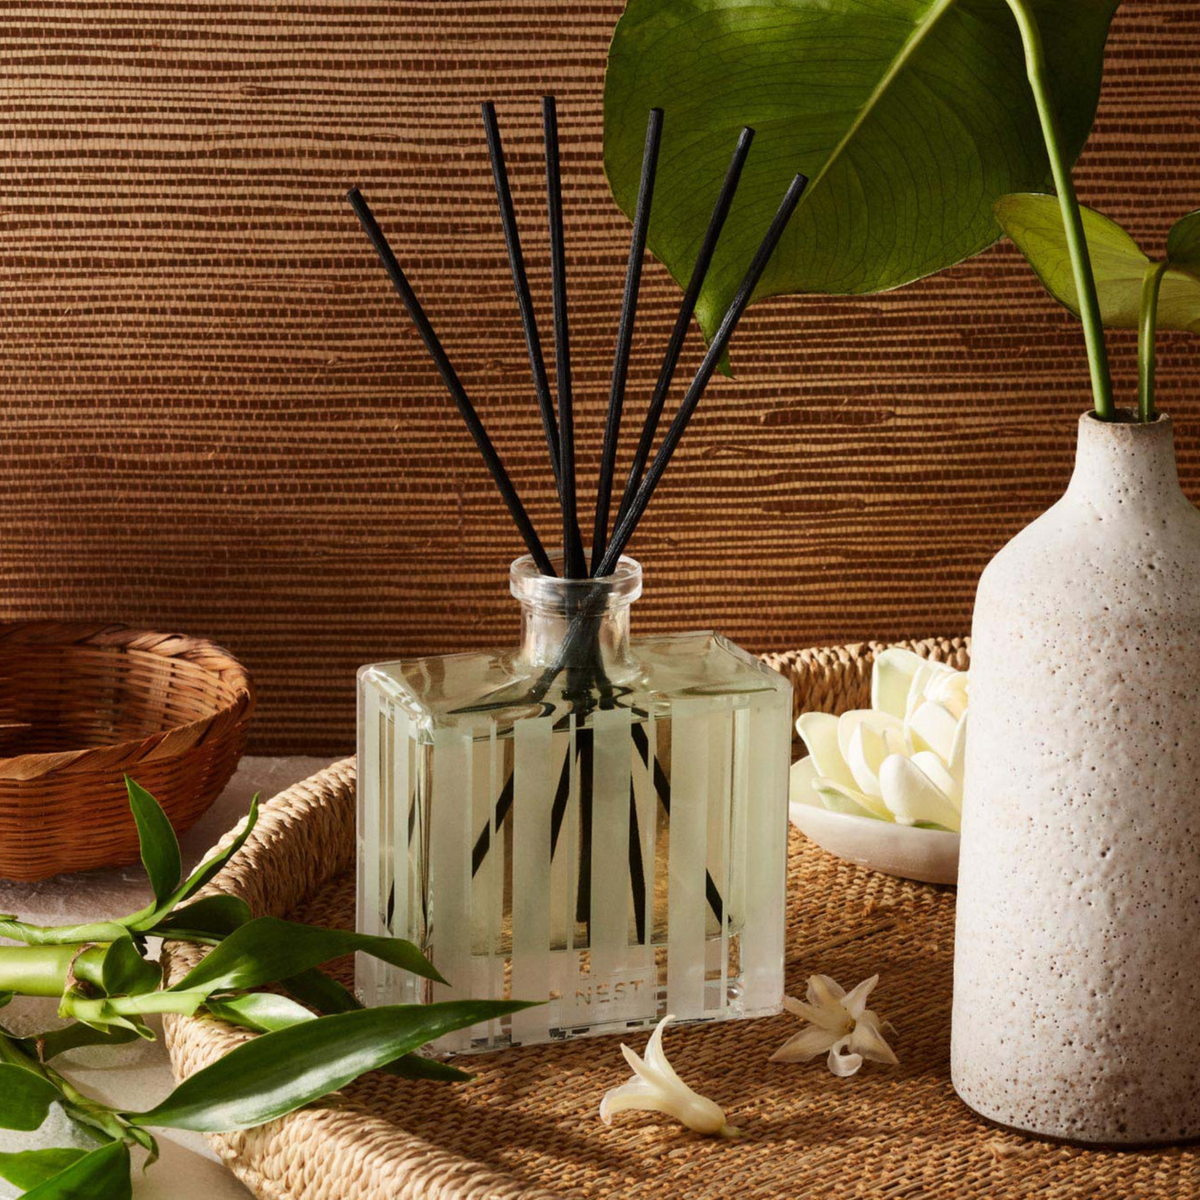 Nest New York’s Bamboo Reed Diffuser Lifestyle in Tray on Counter